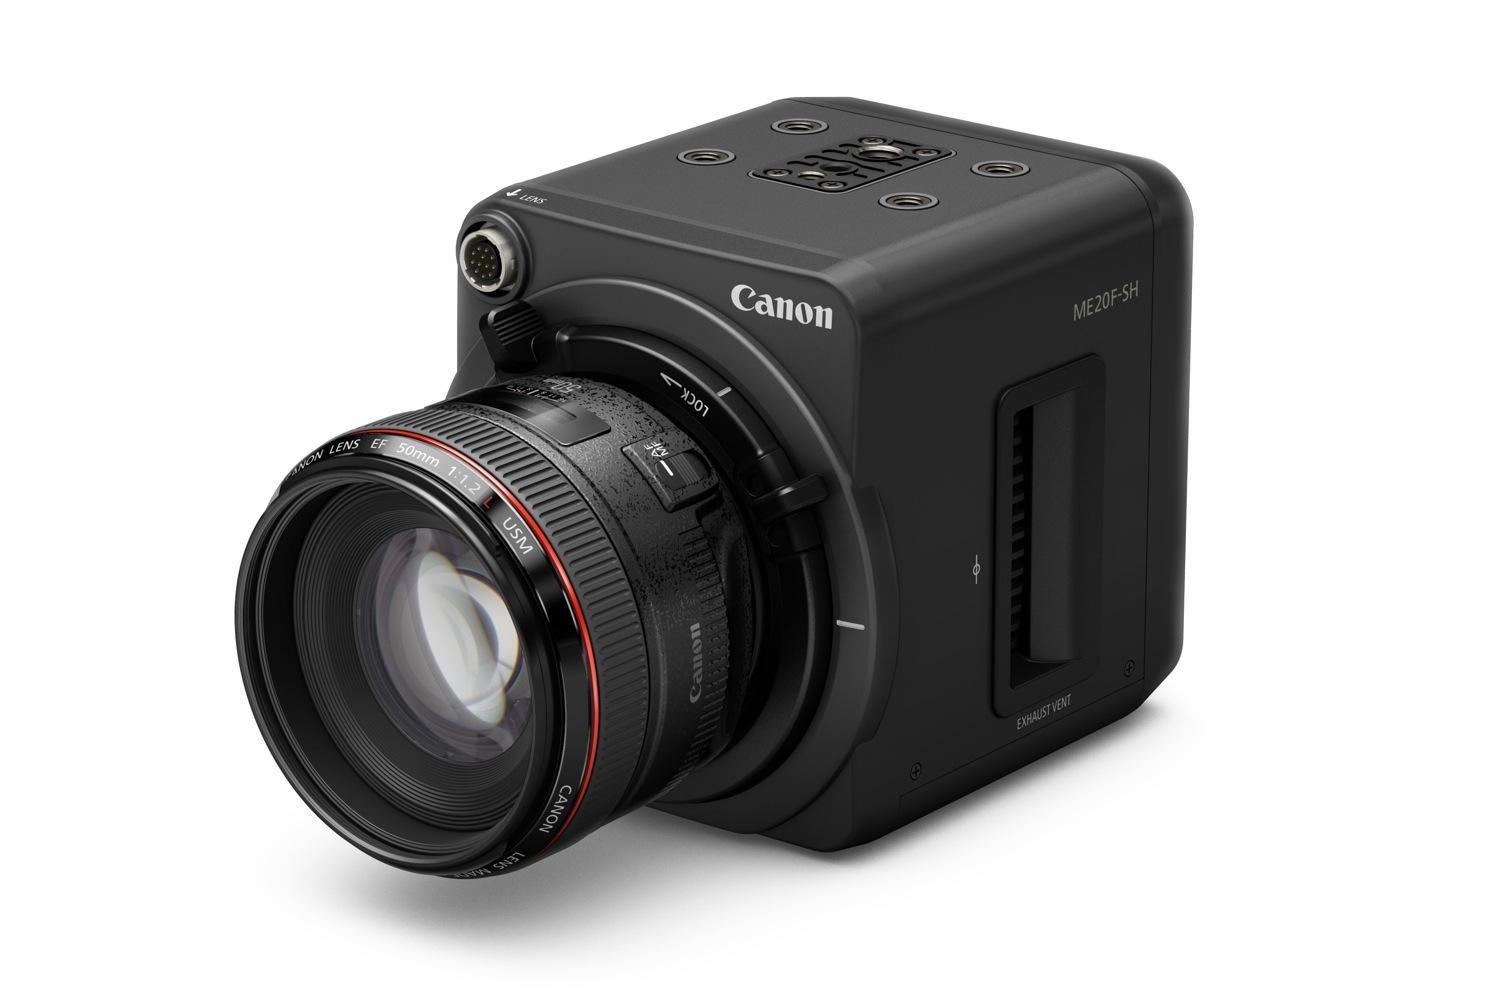 canons new video camera sees in the dark better than your eyes can canon me20f sh 2